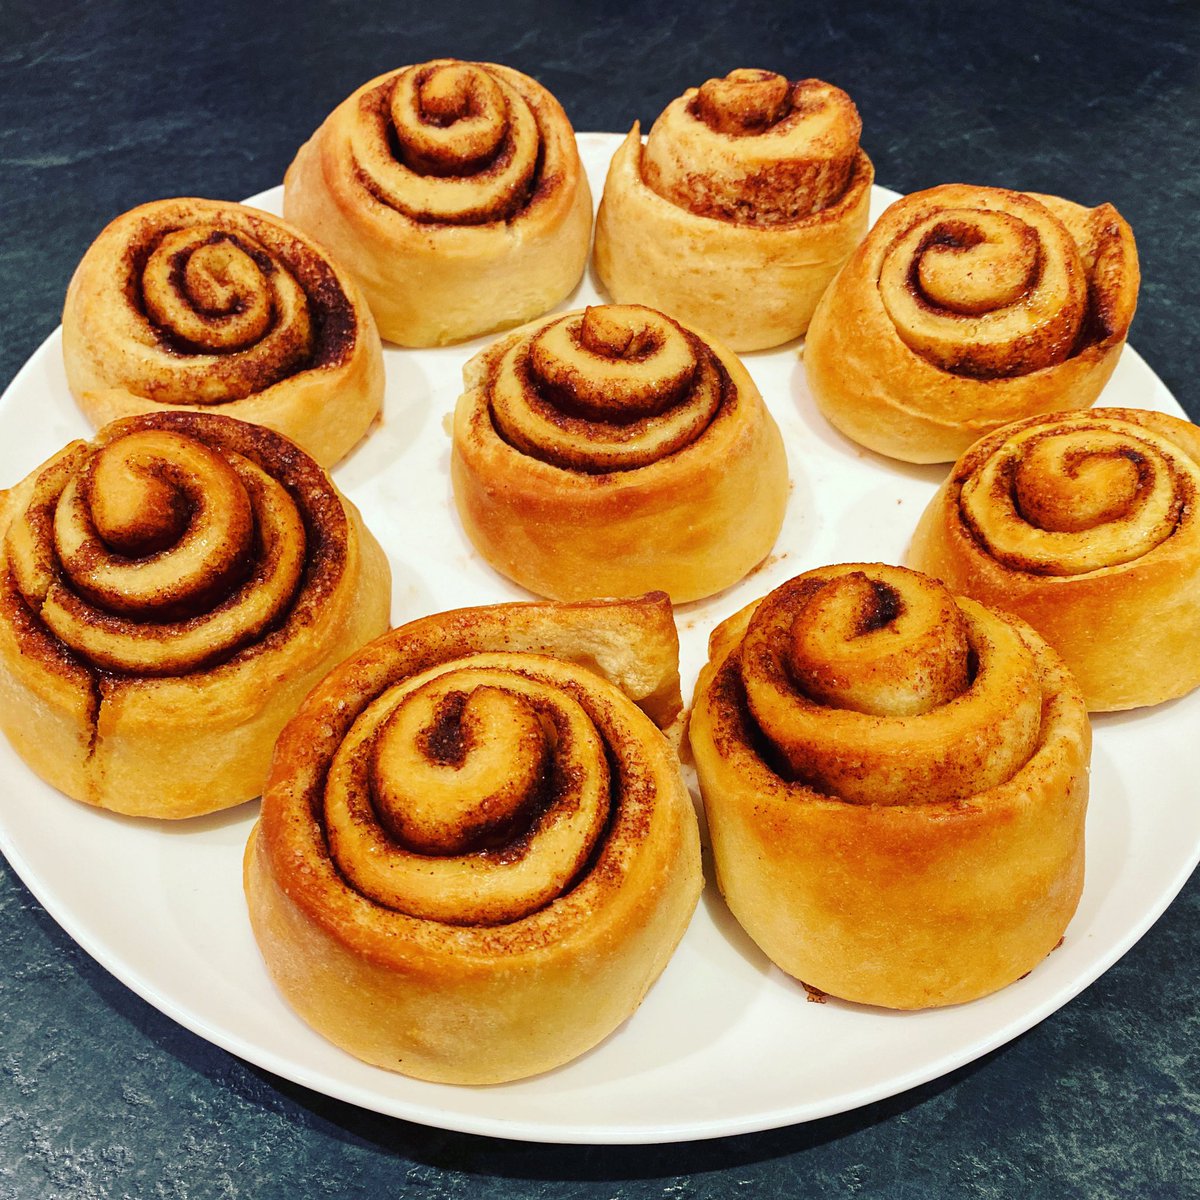 When your 12 year old knows you love cinnamon rolls but worried about a nut allergy so she learns to make these! No nut worries for me today.... just a few more calories to work off! #allergyapplause for making my day 🥰 Well done @izzywhizzie1